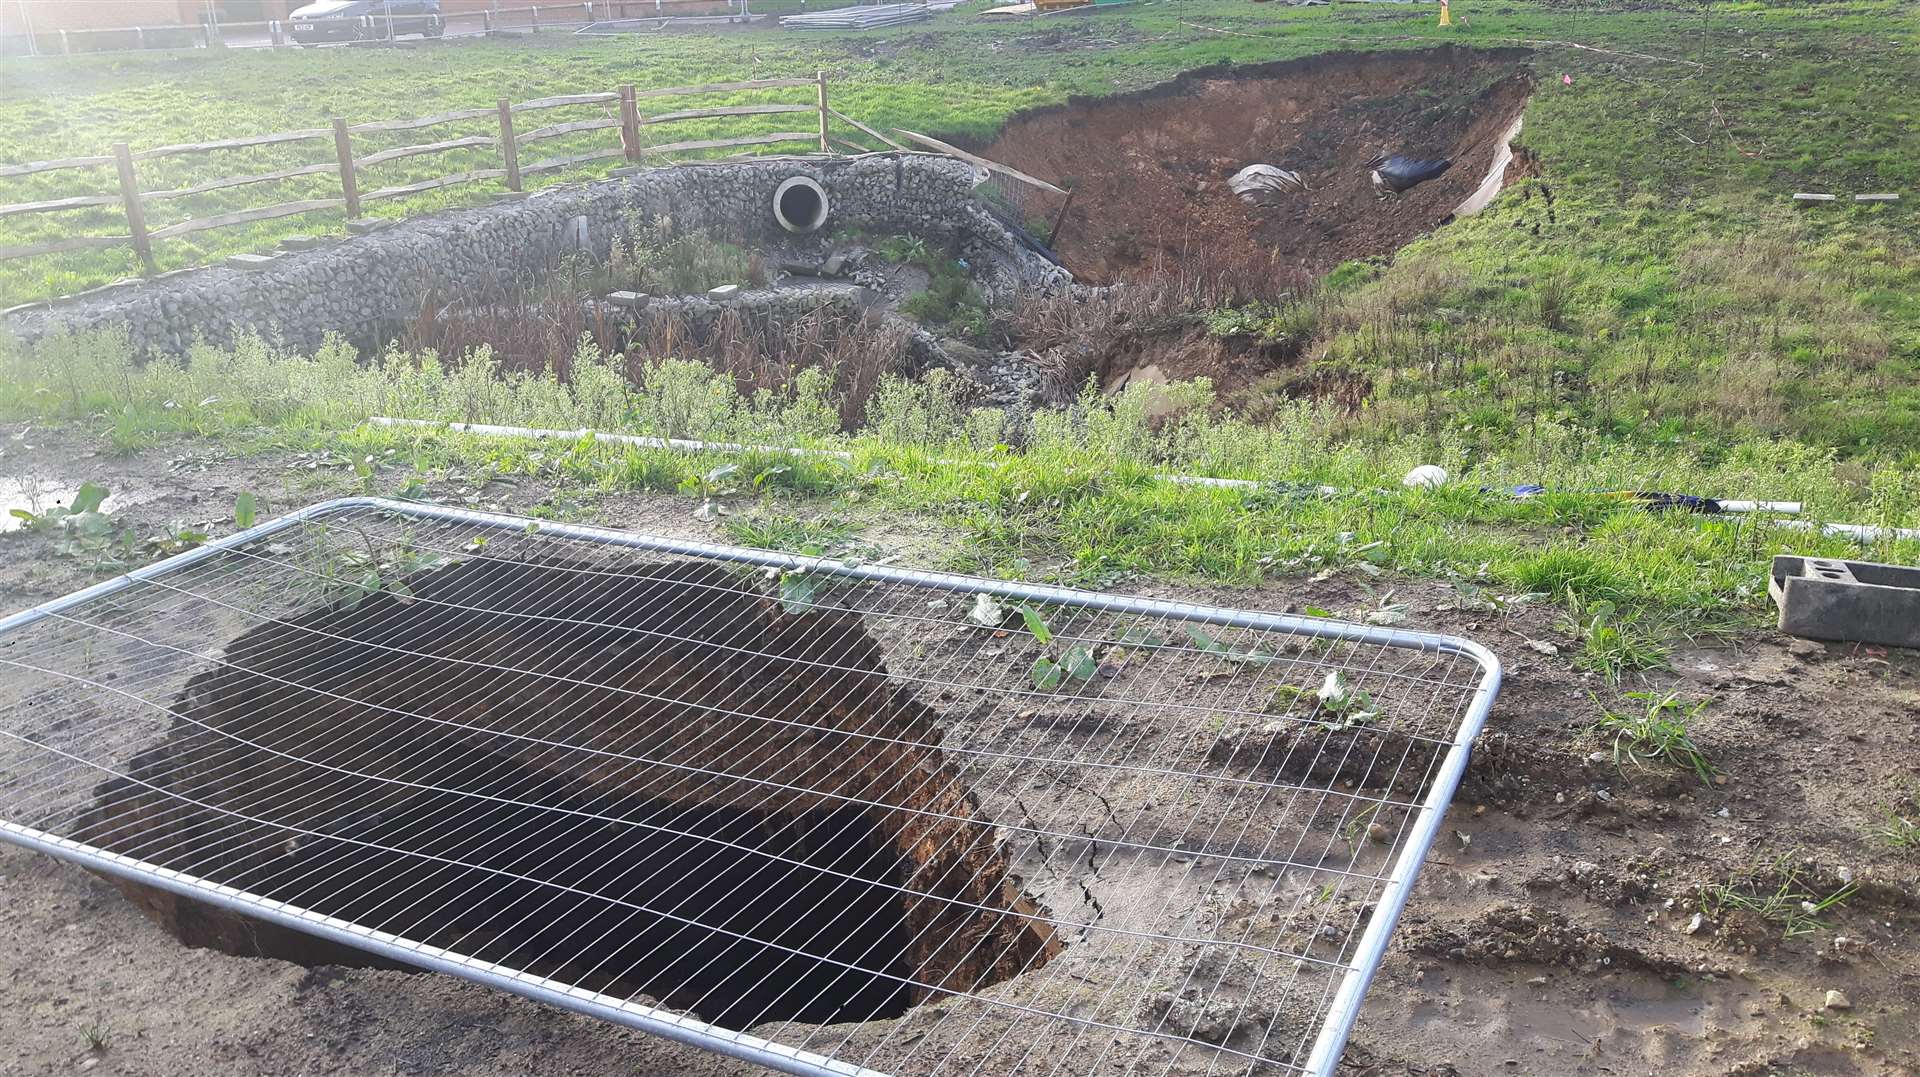 The latest sinkhole in Barming has appeared close to an even larger previous collapse